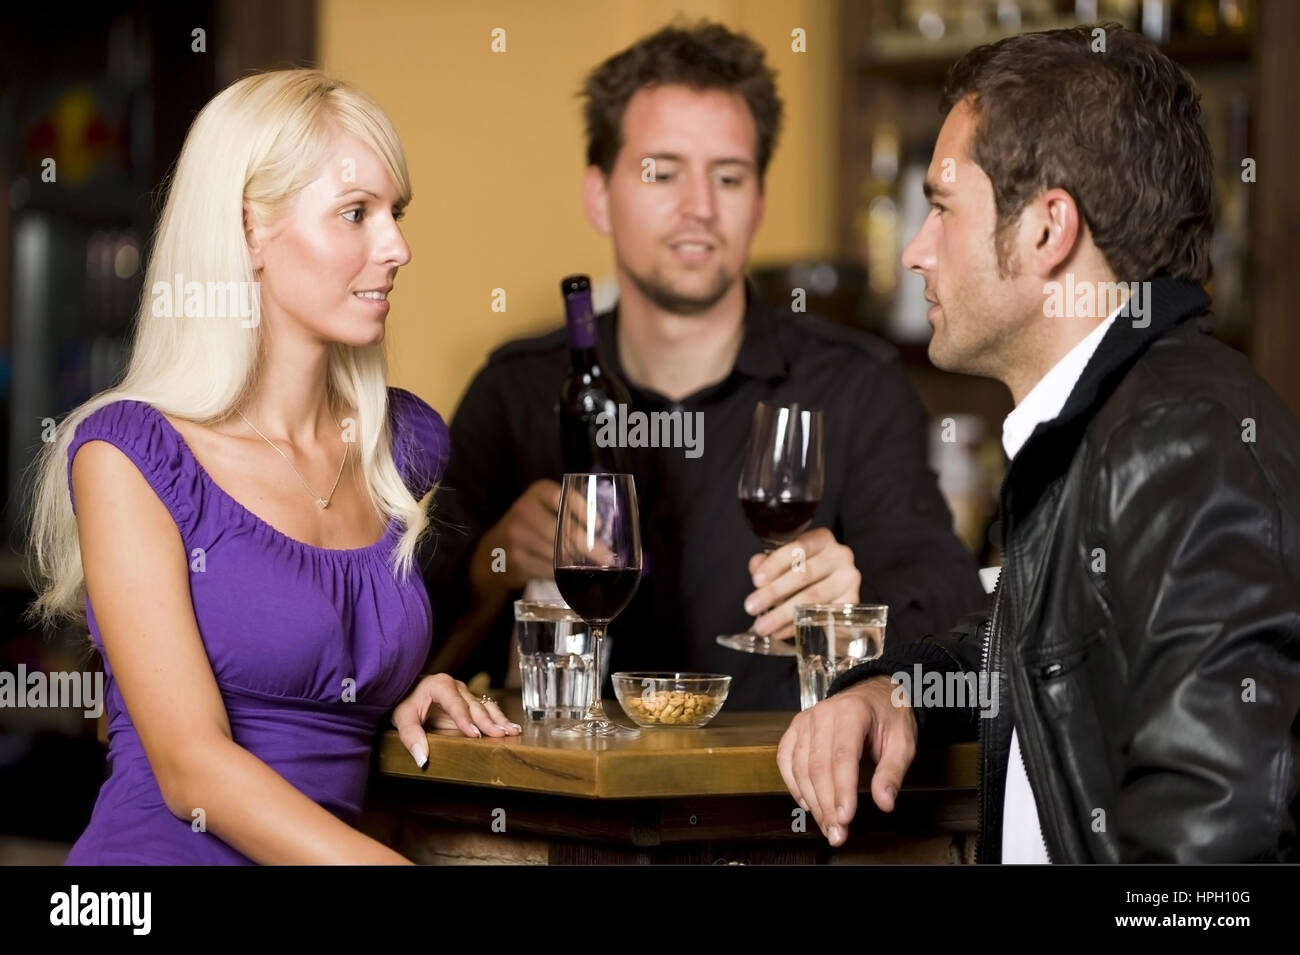 Model released , Paar und Kellner an der Theke - couple and waiter at the bar Stock Photo